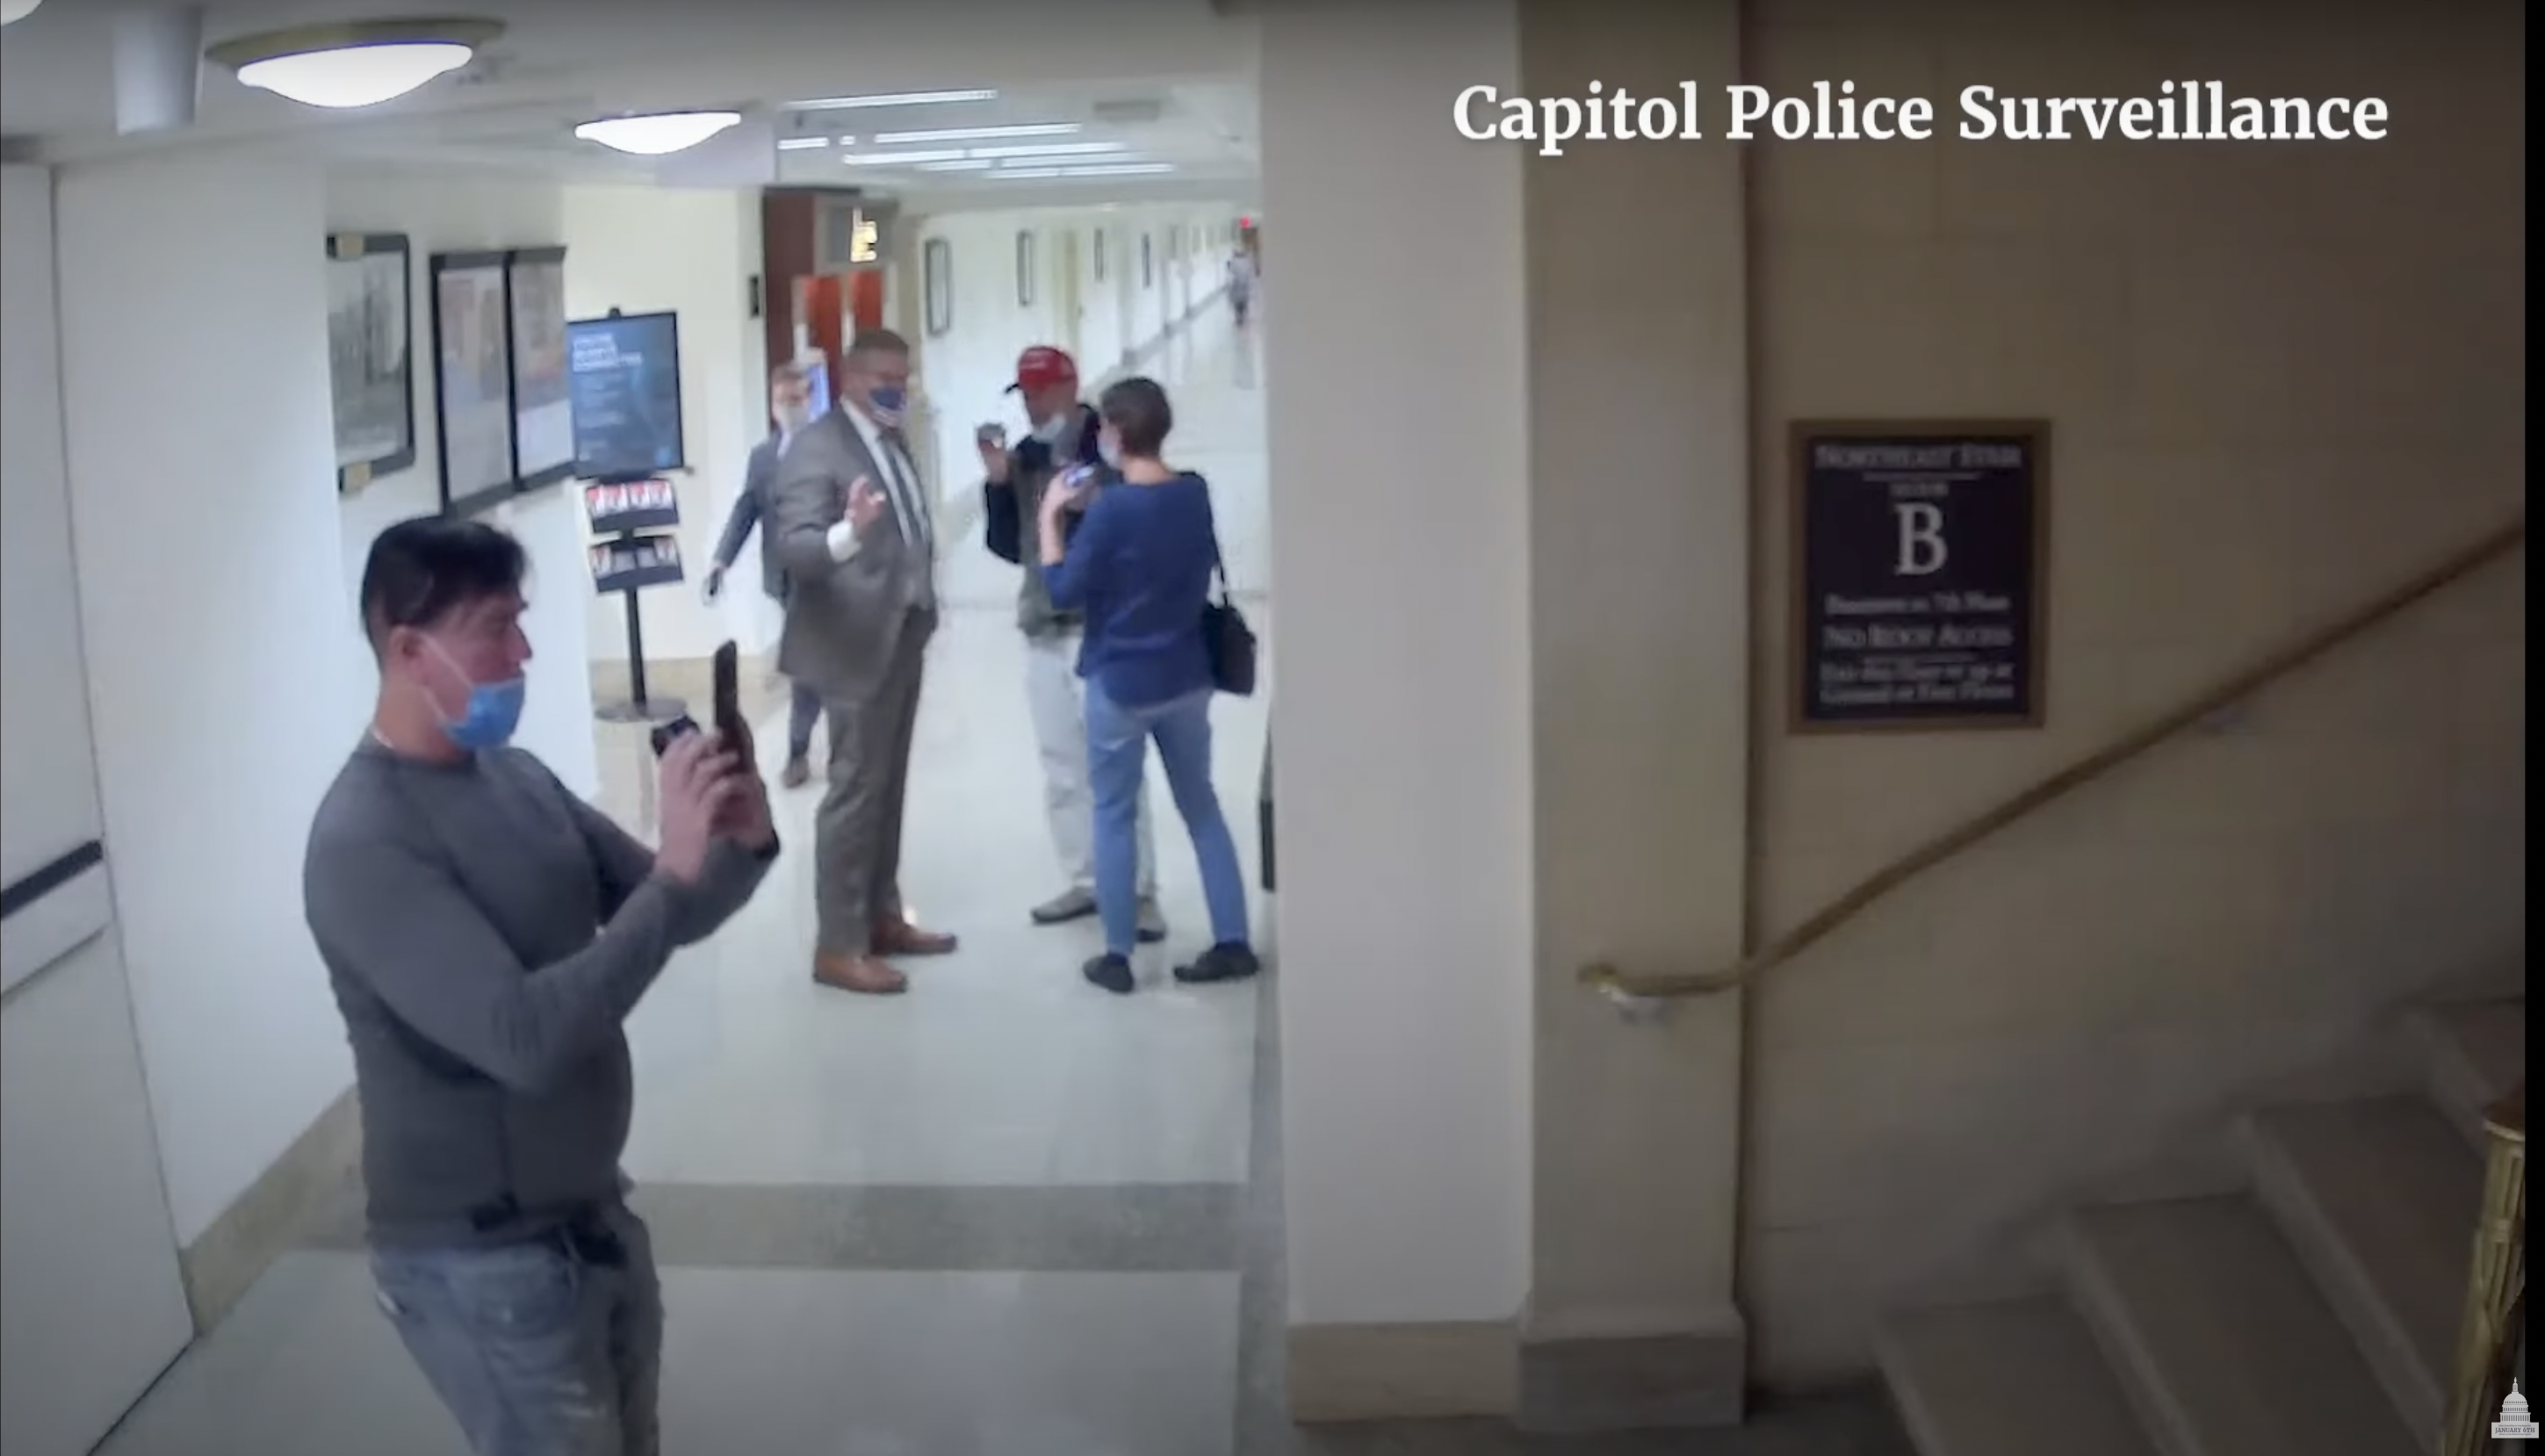 Jan. 6 committee releases video of Capitol tour led by Rep. Loudermilk